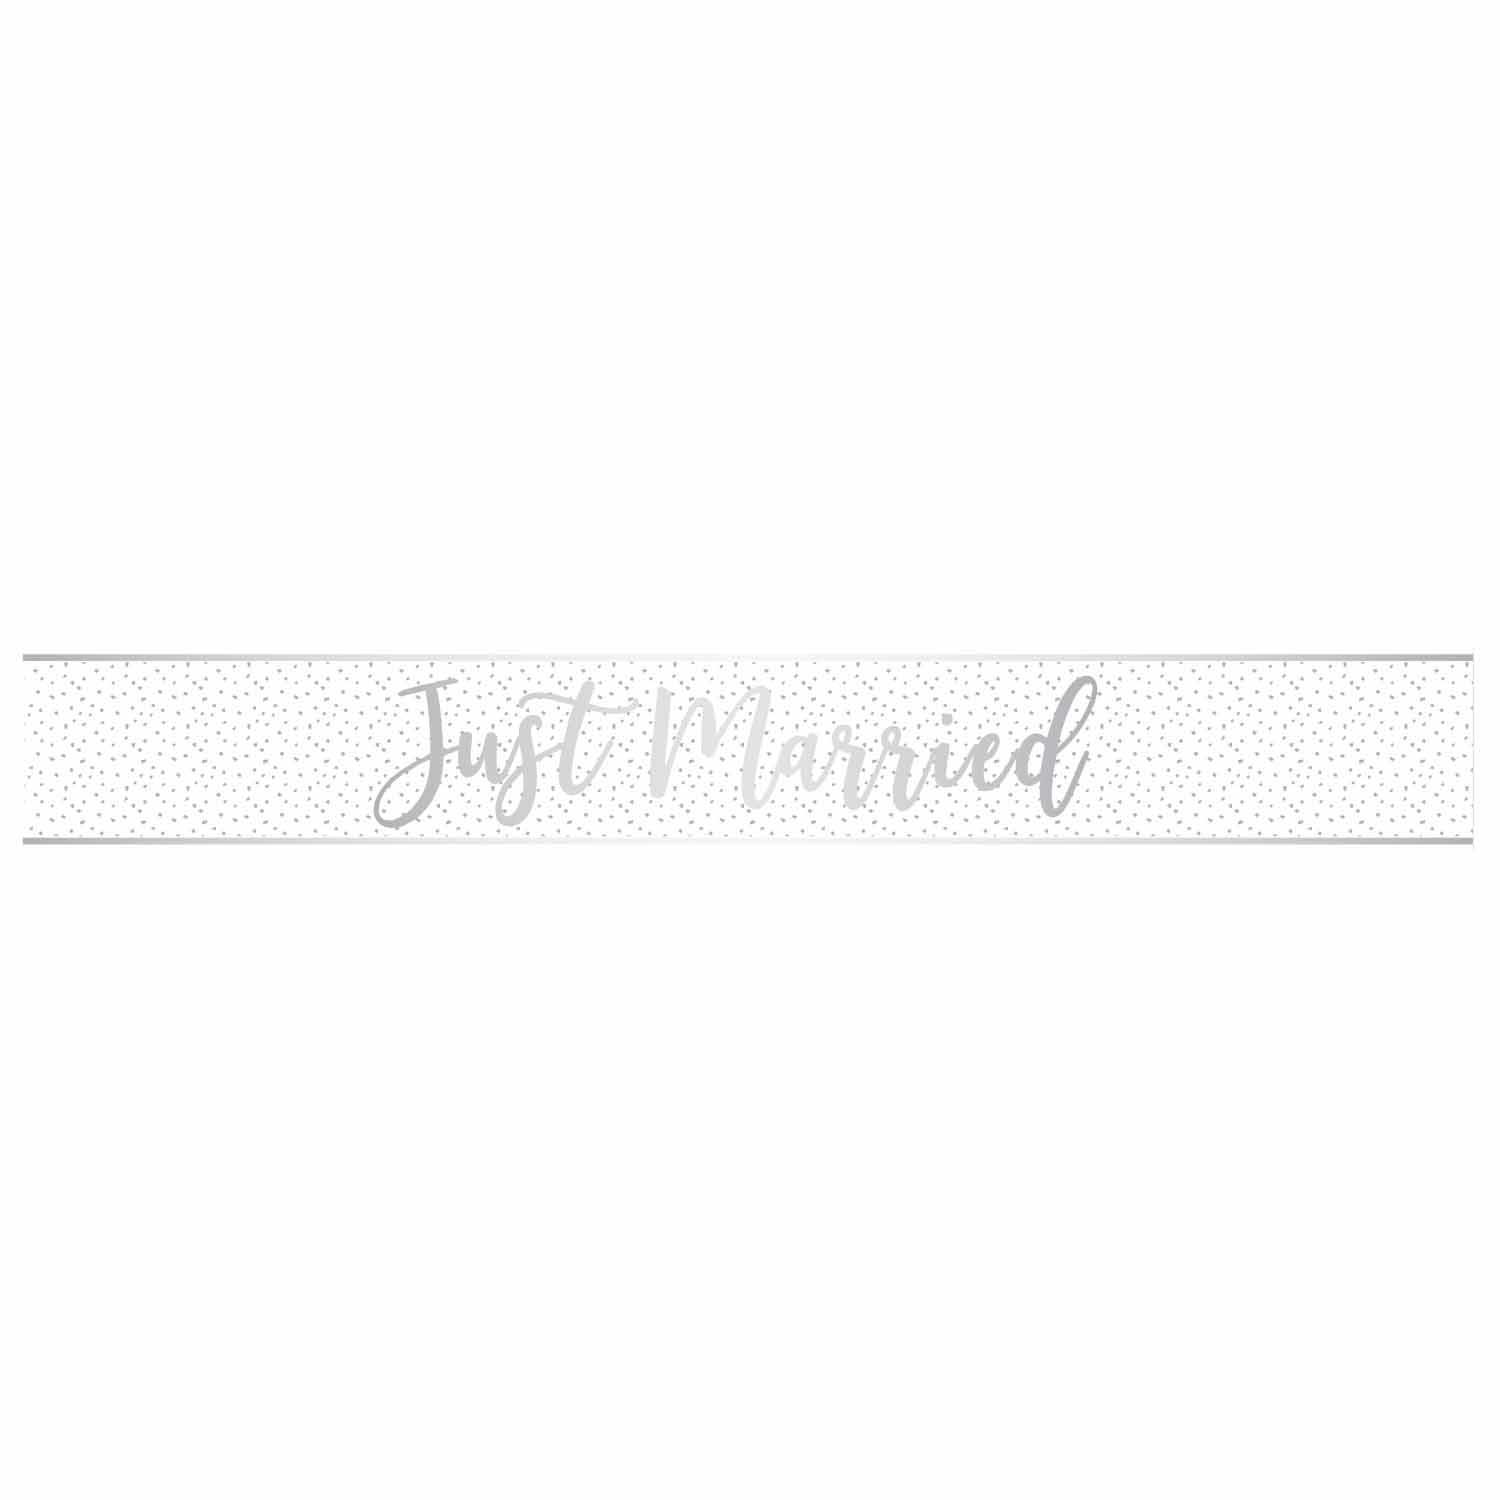 Just Married Foil Banner White/Silver